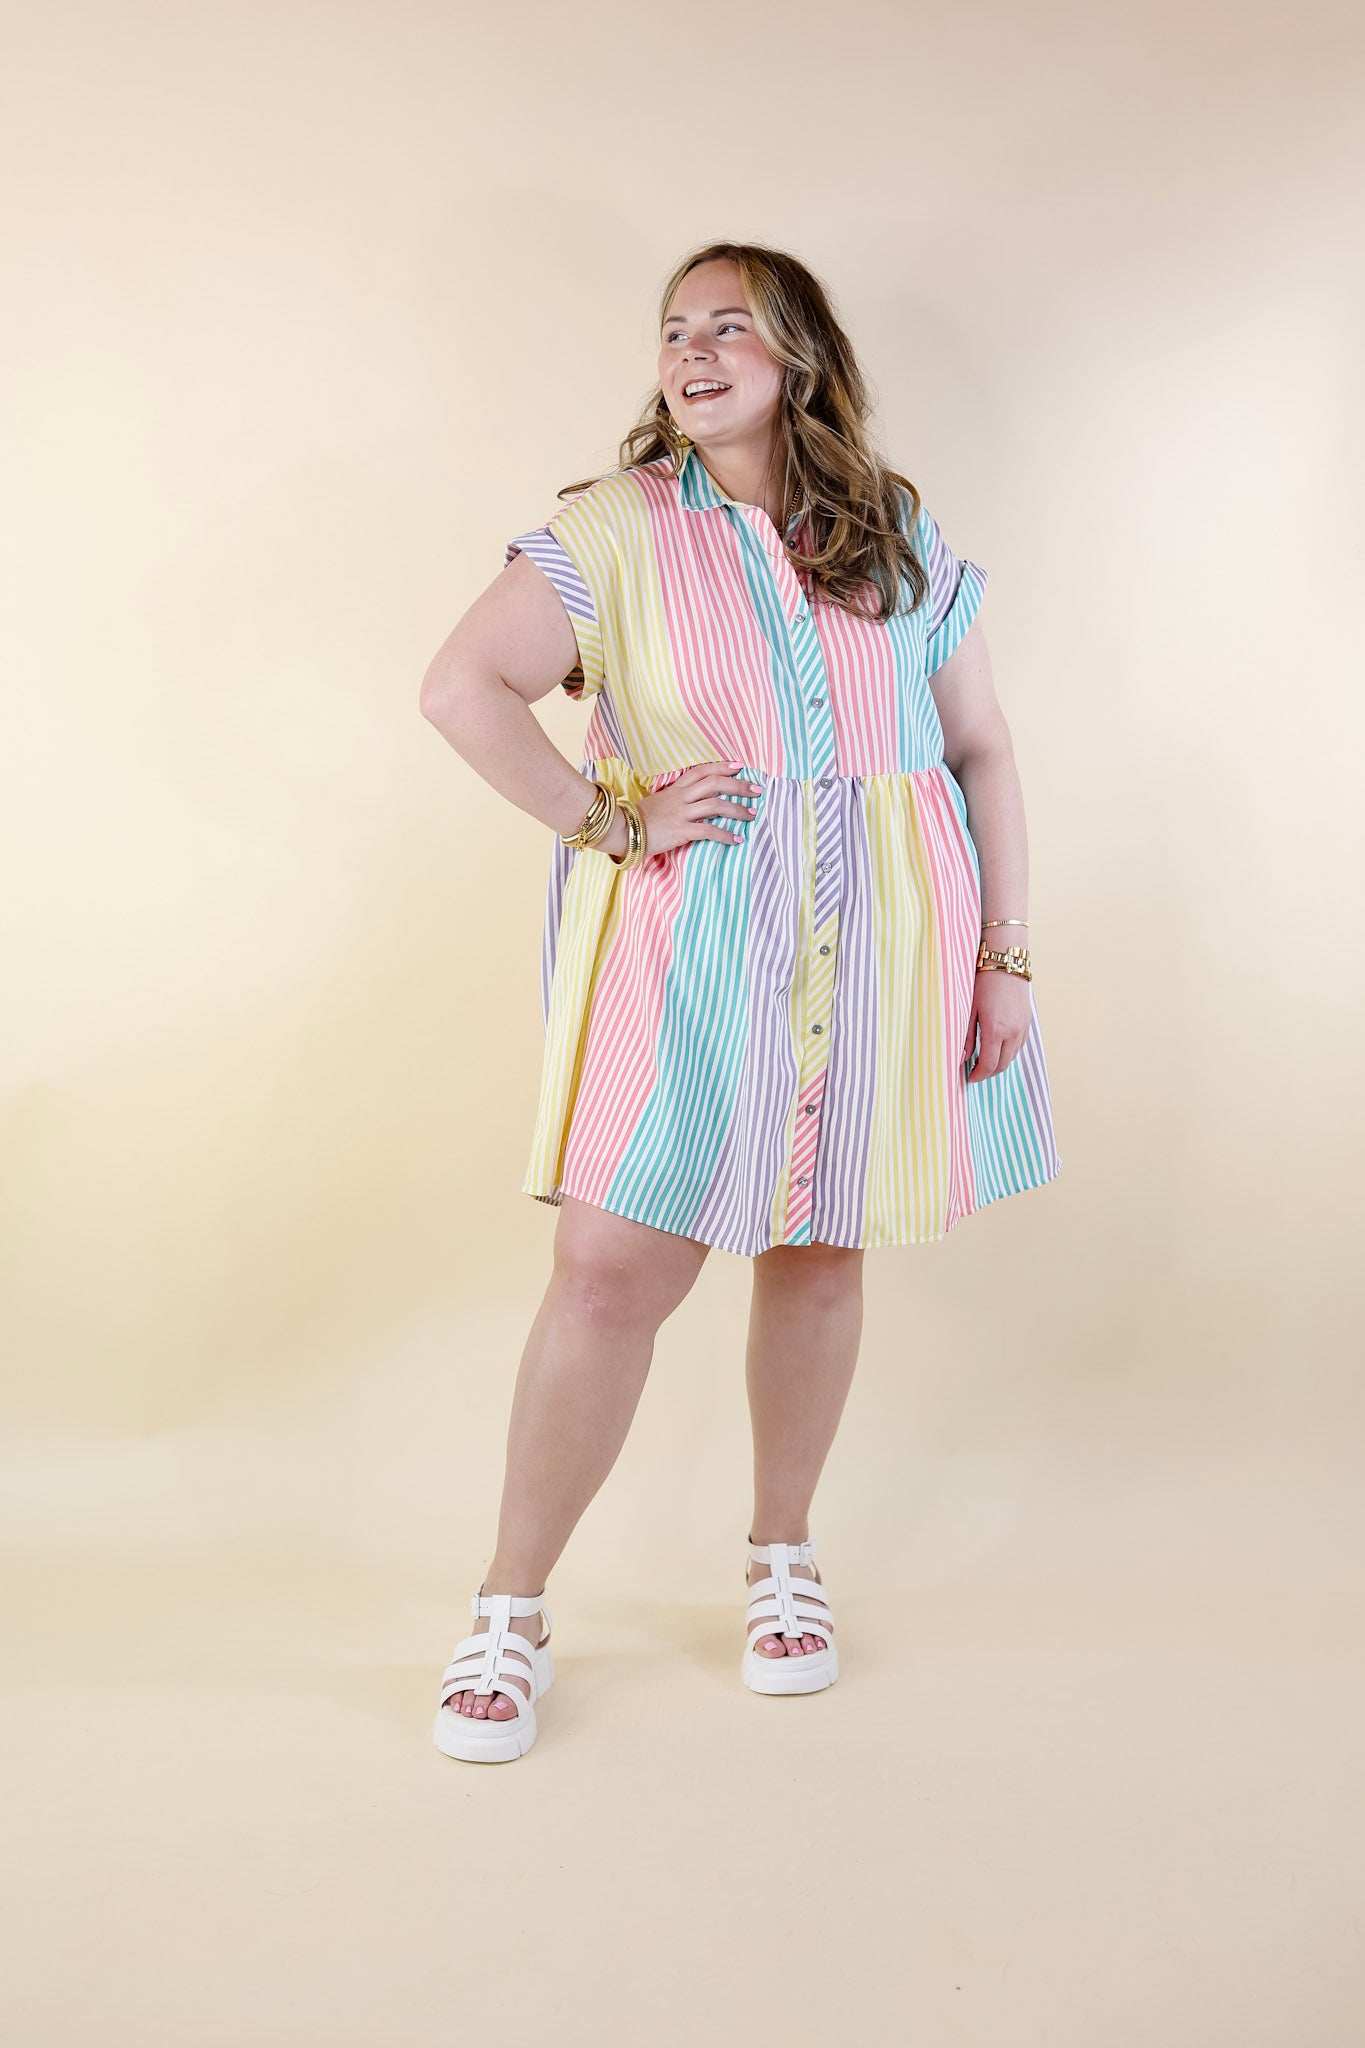 Spring Symphony Multi Color Striped Dress with Collar - Giddy Up Glamour Boutique